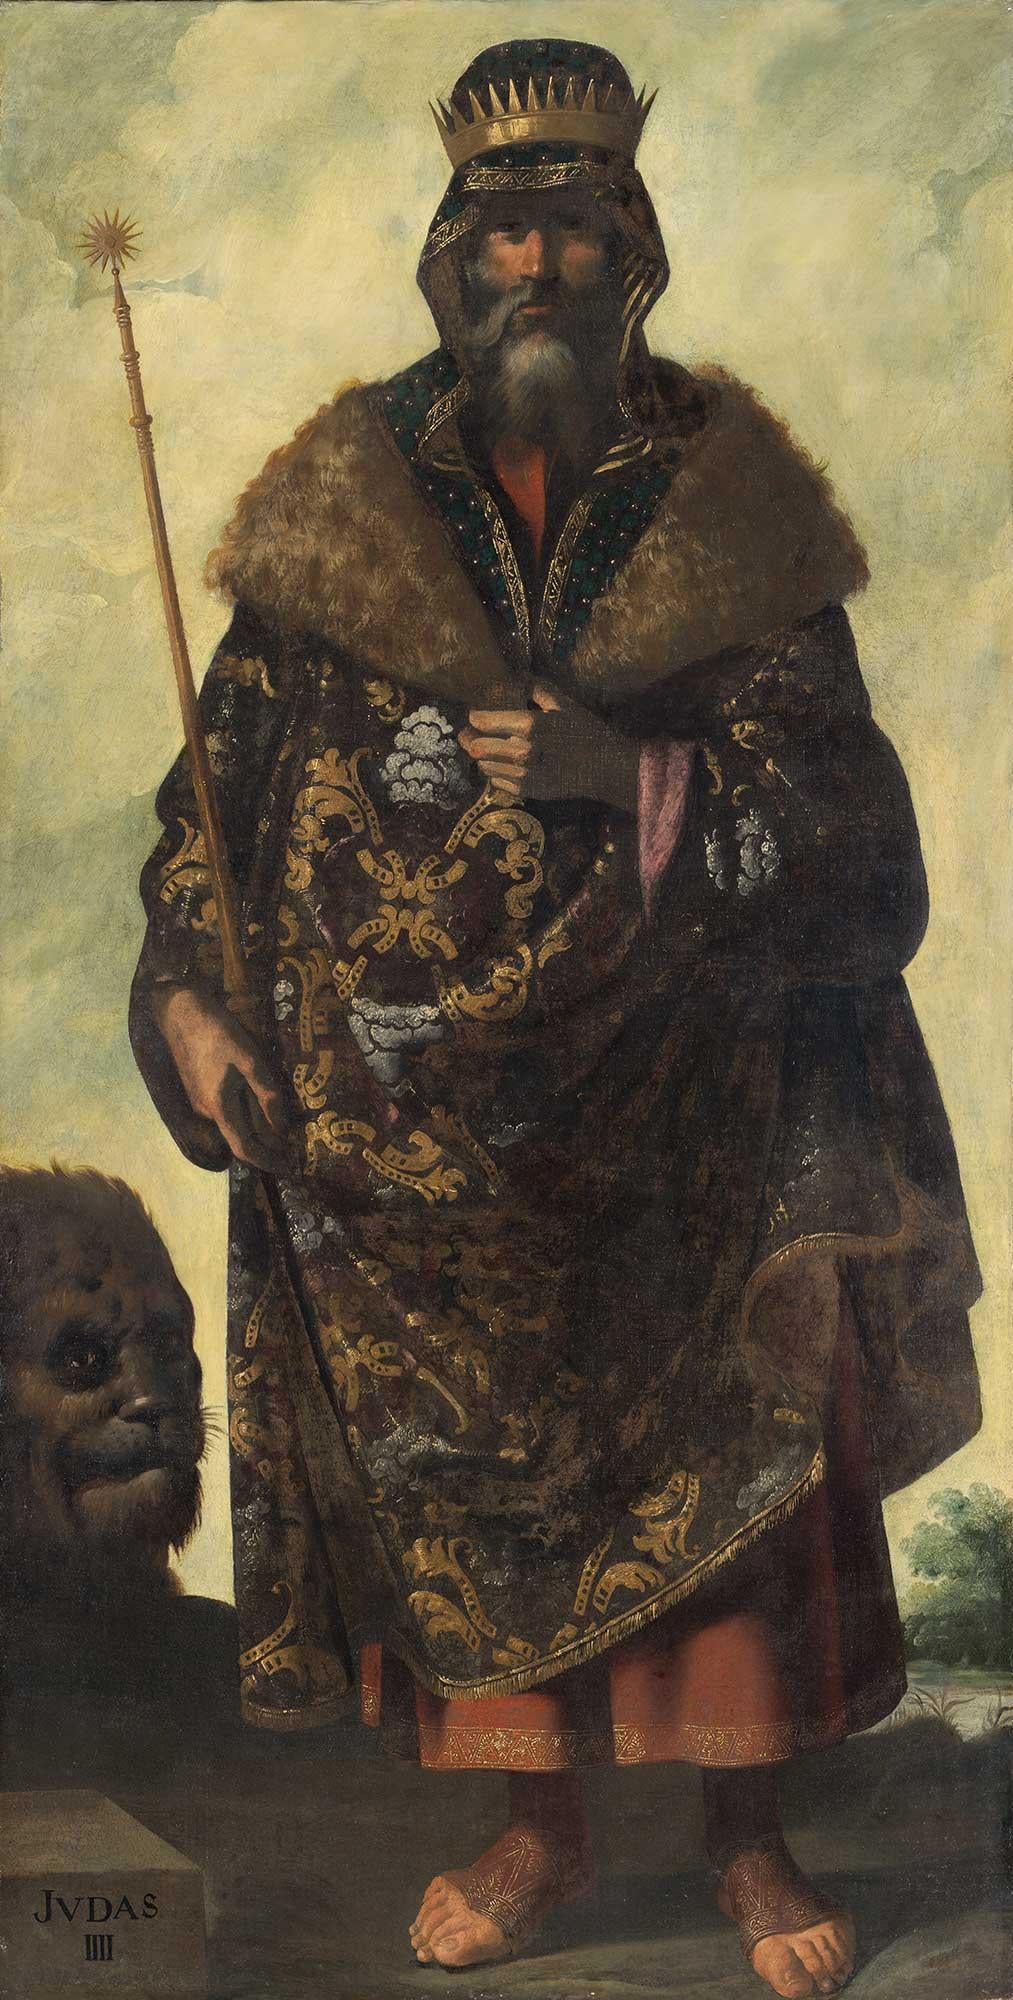 oil painting of man with crown, scepter, and ornate robe, with lion at feet